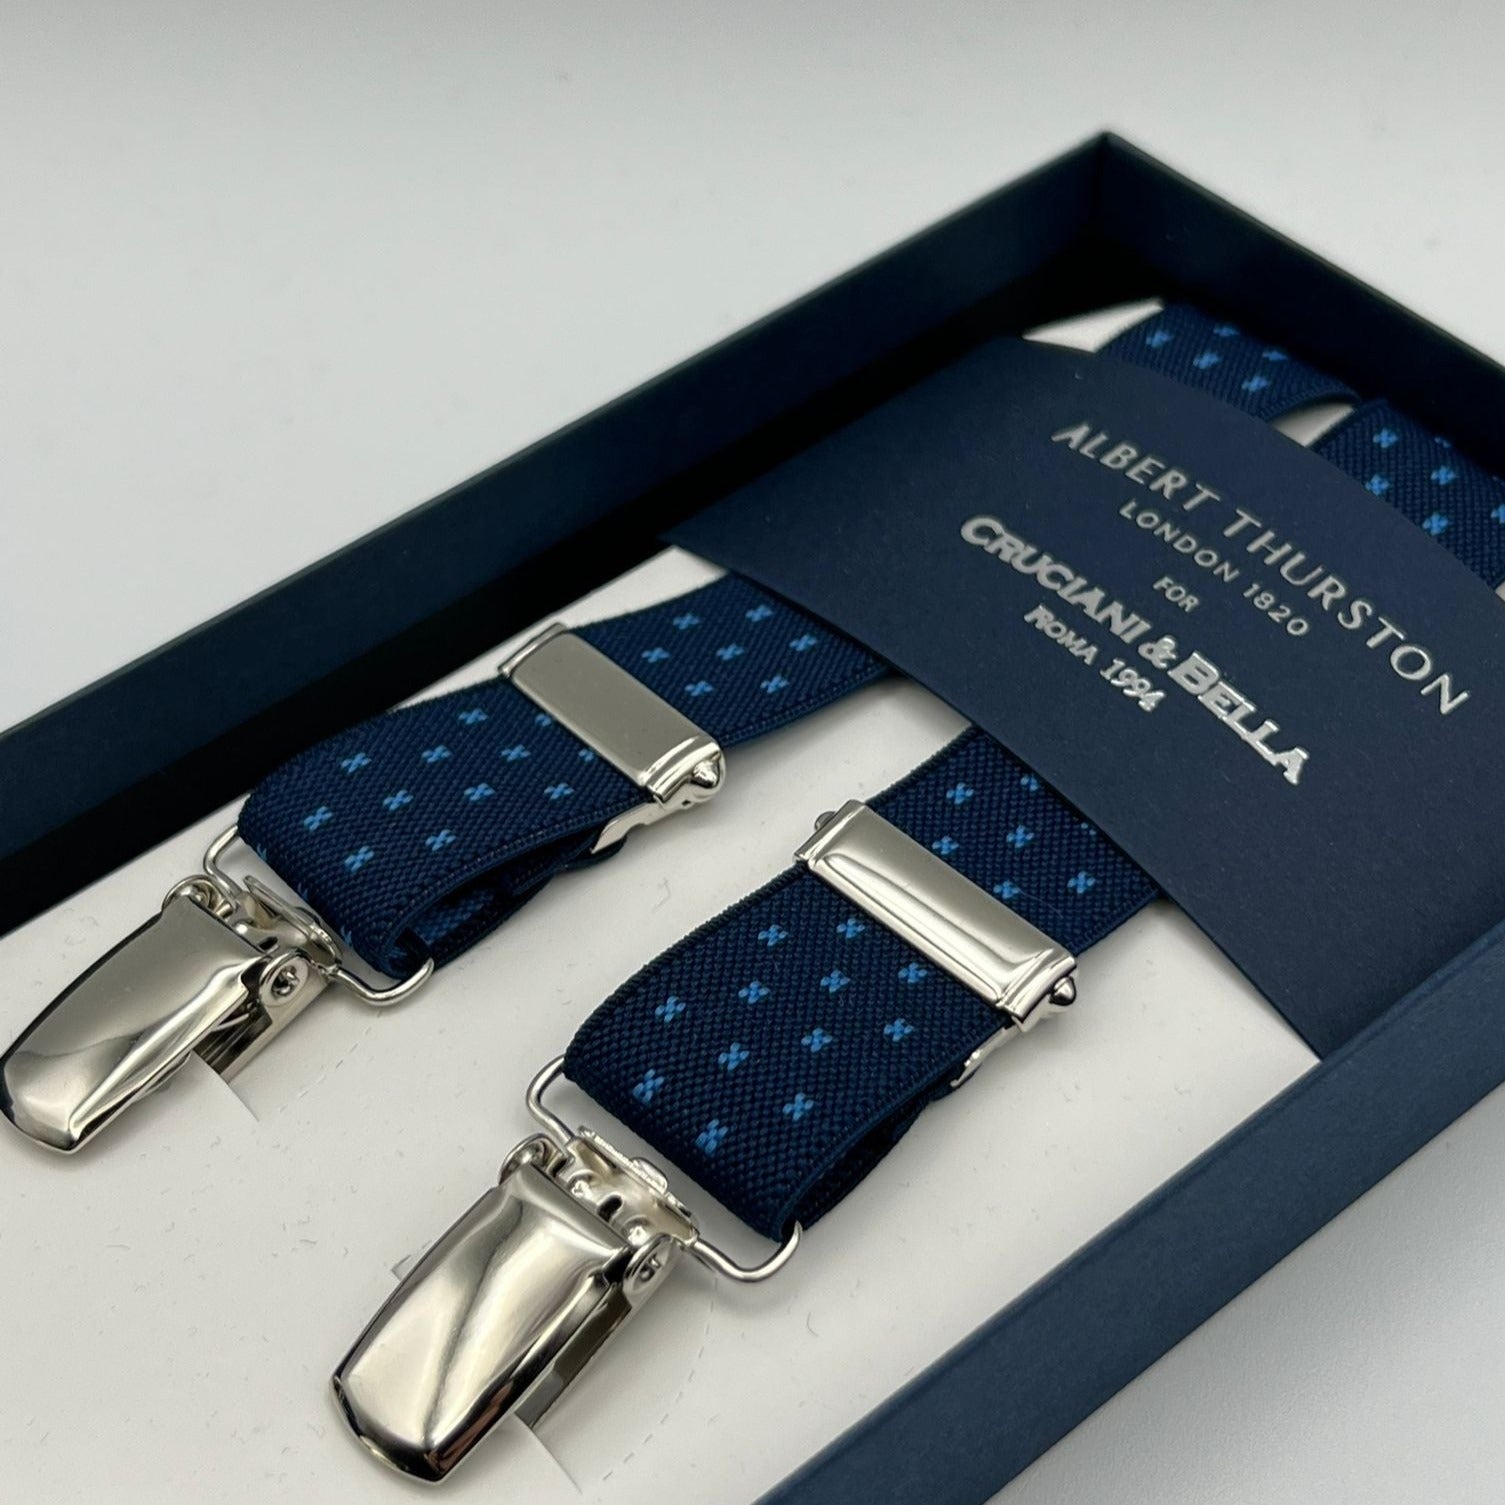 Albert Thurston for Cruciani & Bella Made in England Clip on Adjustable Sizing 25 mm elastic braces Blue, Light Blue Motif X-Shaped Nickel Fittings Size: L #7379